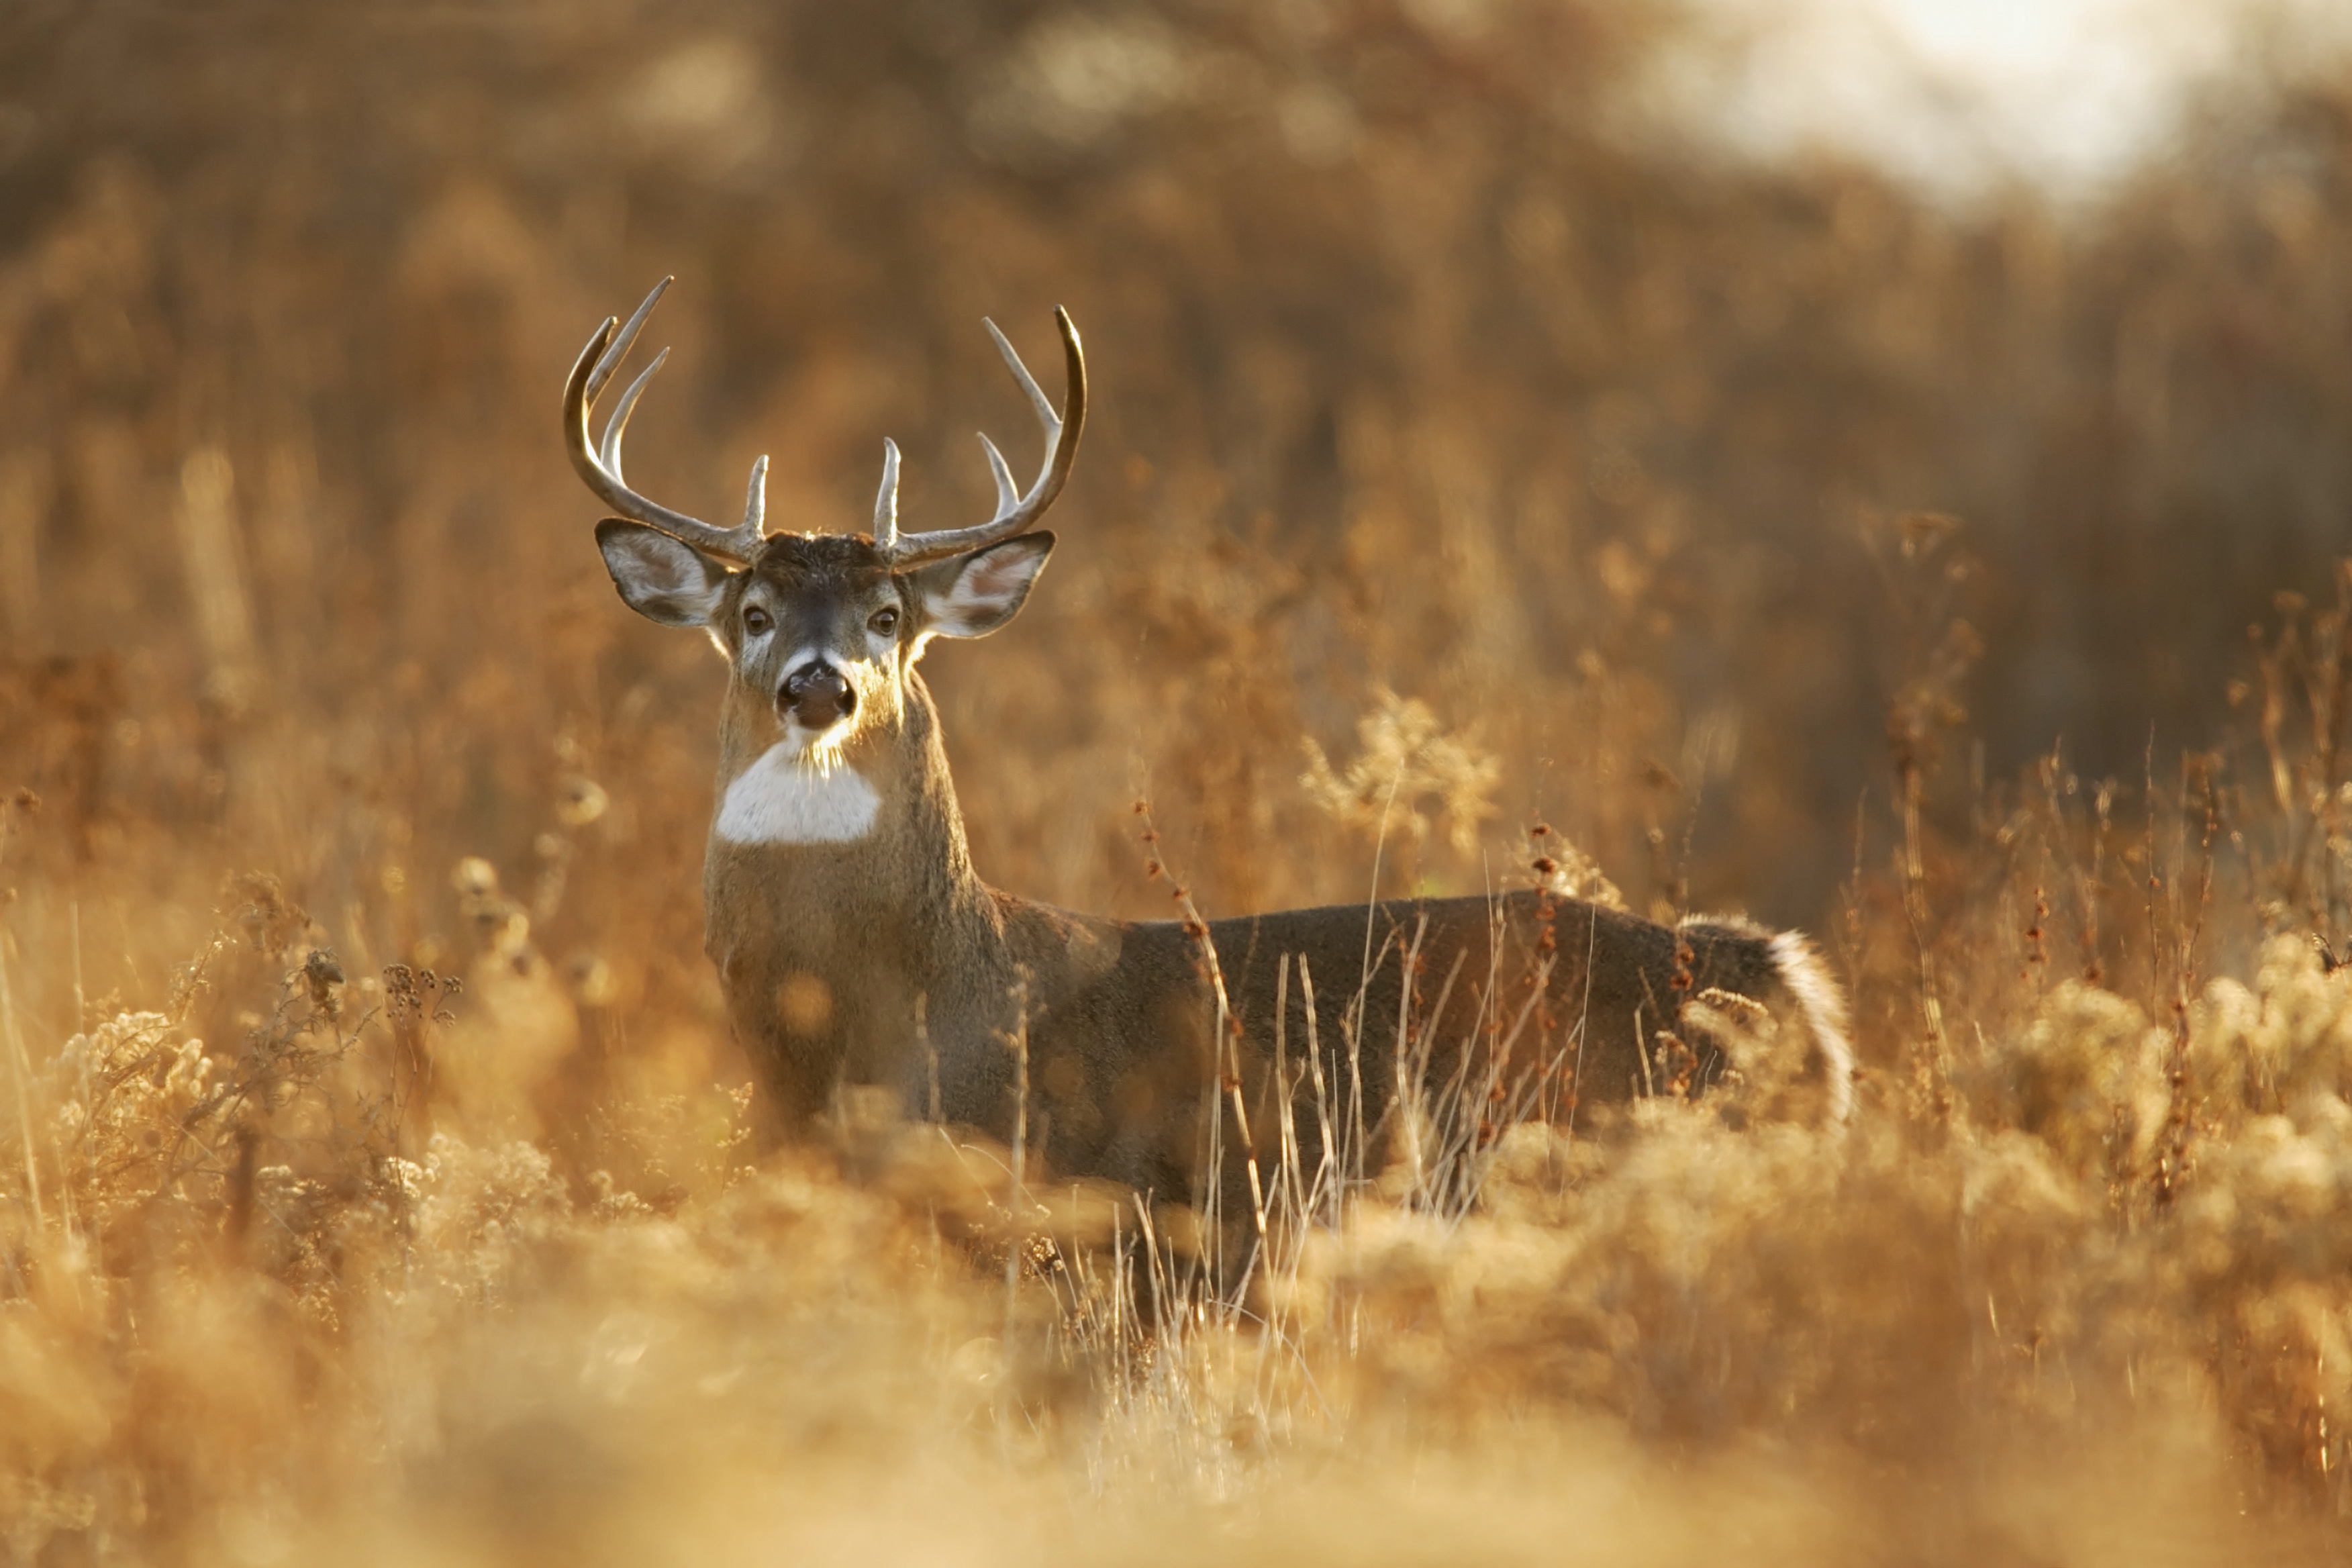 Tips From a Taxidermist: How to Prep Deer for a Mount